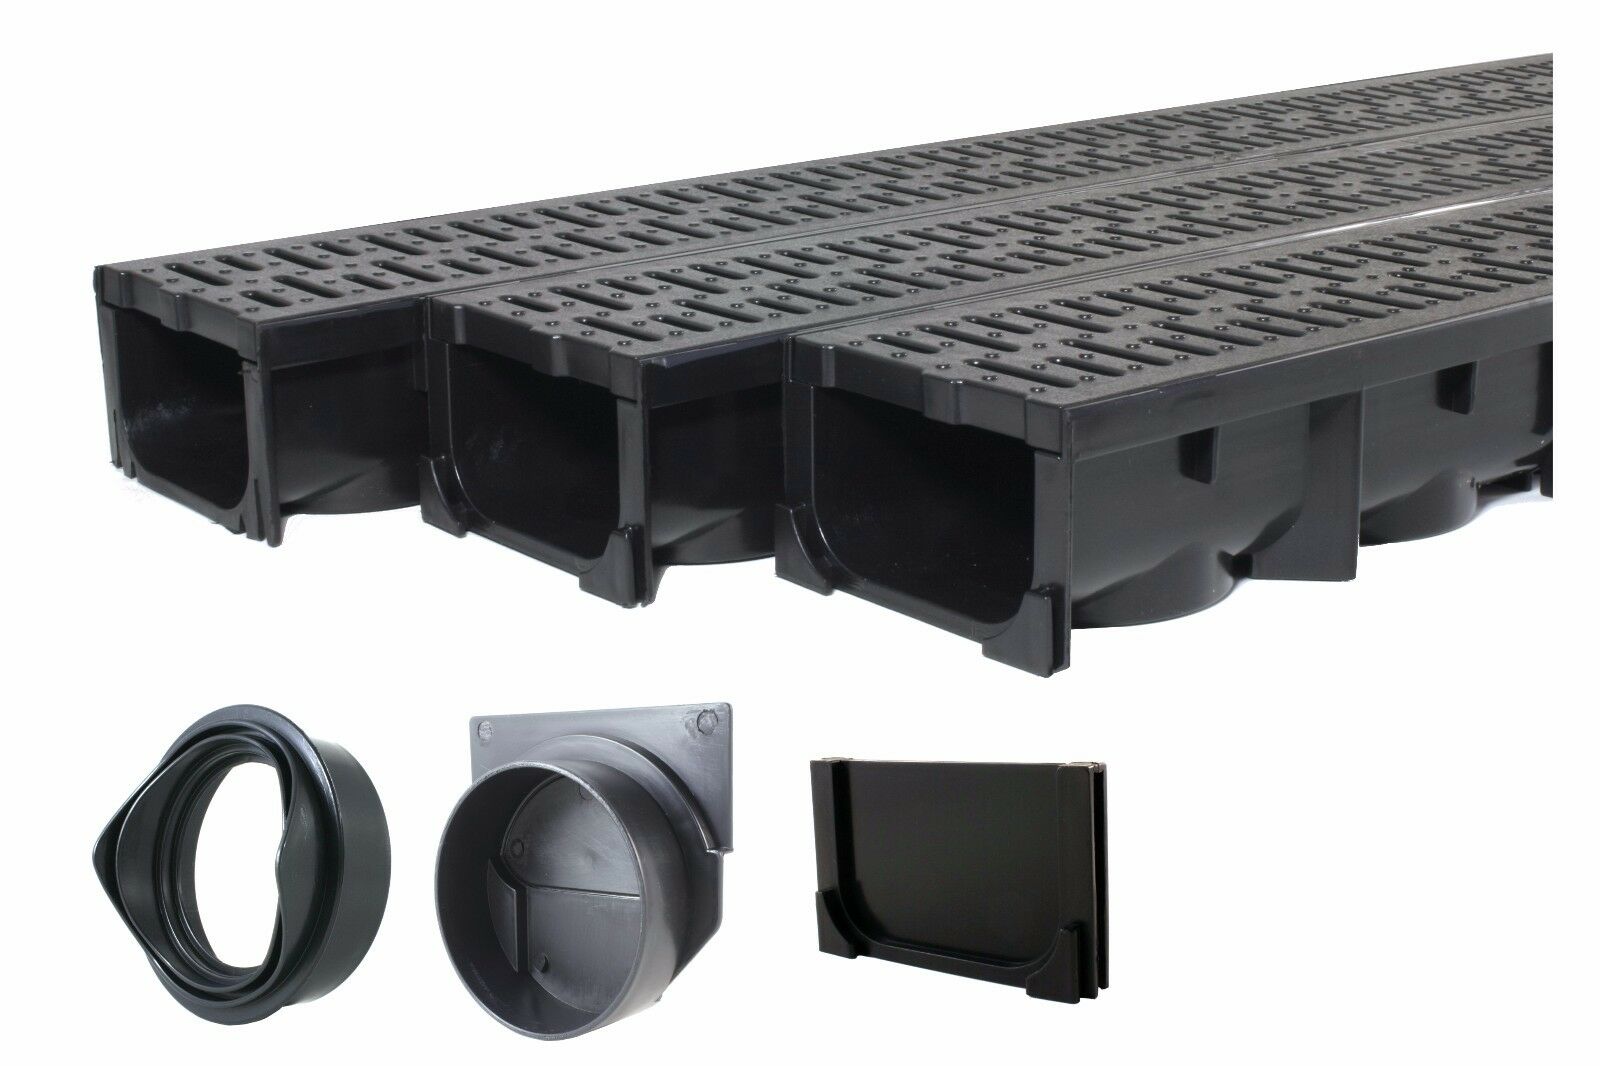 Drainage Trench - Channel Drain With Grate - Black Plastic - 3 X 39" - 117" Long